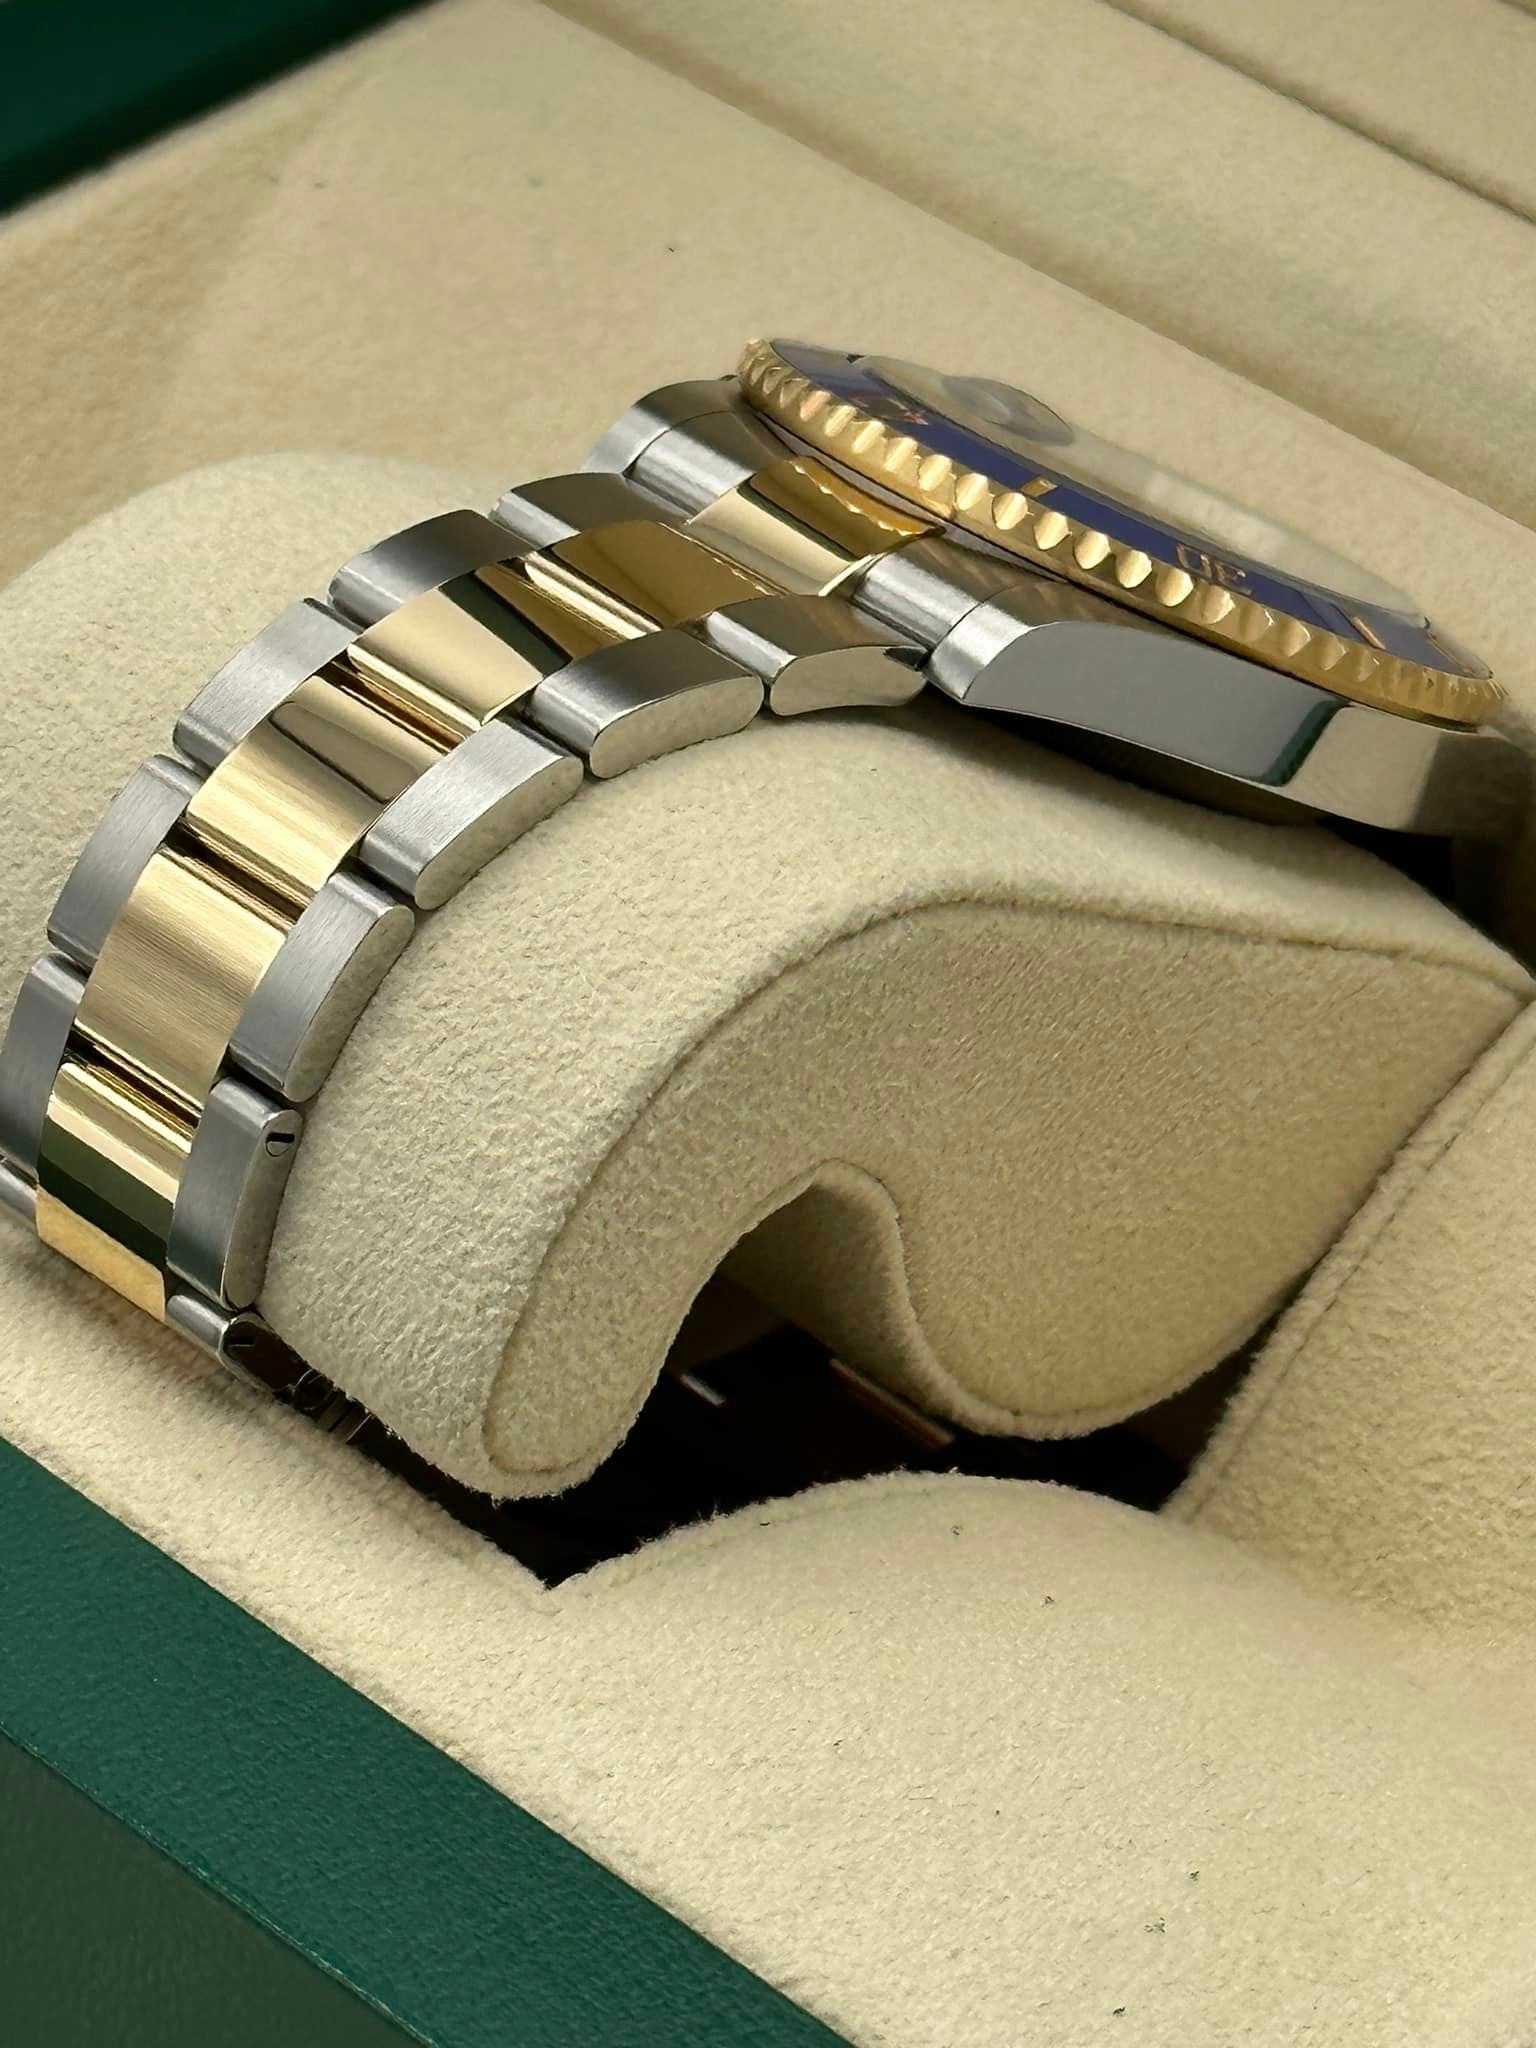 Gold Rolex Submariner Bluesy Date 41mm – Impossible Watches